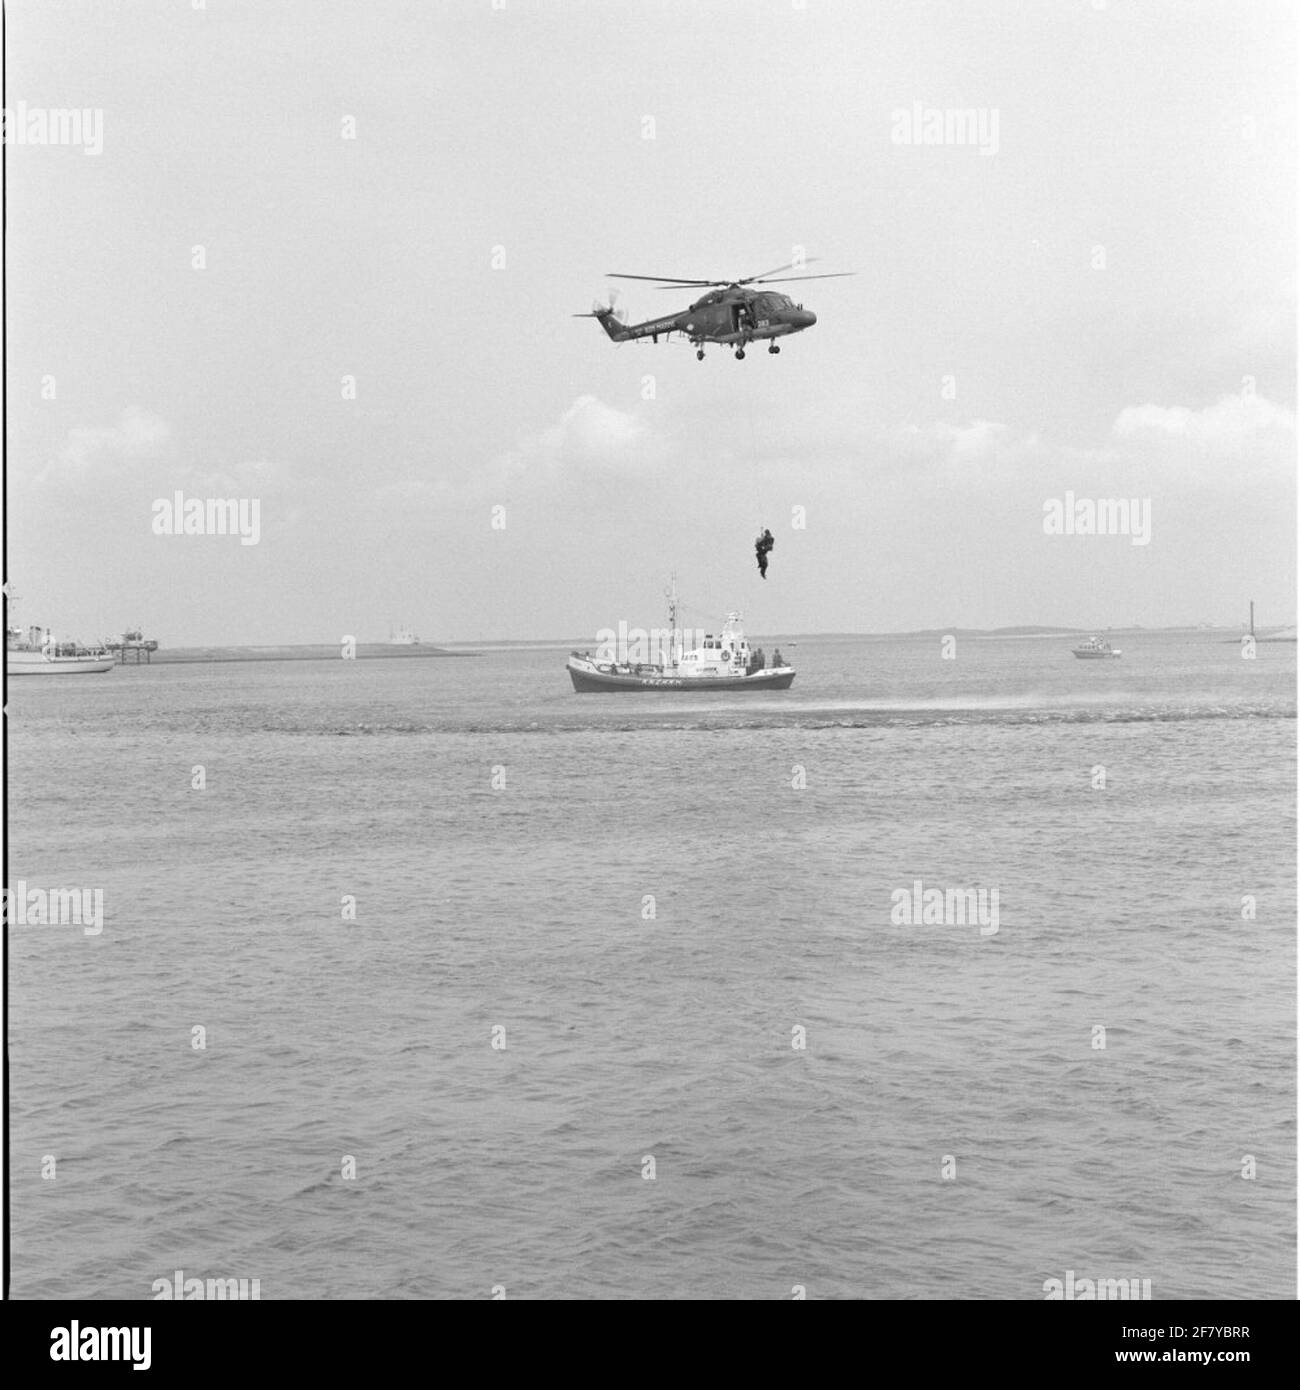 Exercise Pesonentransport from a floating platform by the Westland SH-14D Navy Lynx Helicopter with registration 283 (1981-approx. 2012) in collaboration with the bright rescue boat Suzanna (1968-1998) of the Royal North and South Holland Redding Company (Knzhrm) In May 1990 .. Stock Photo